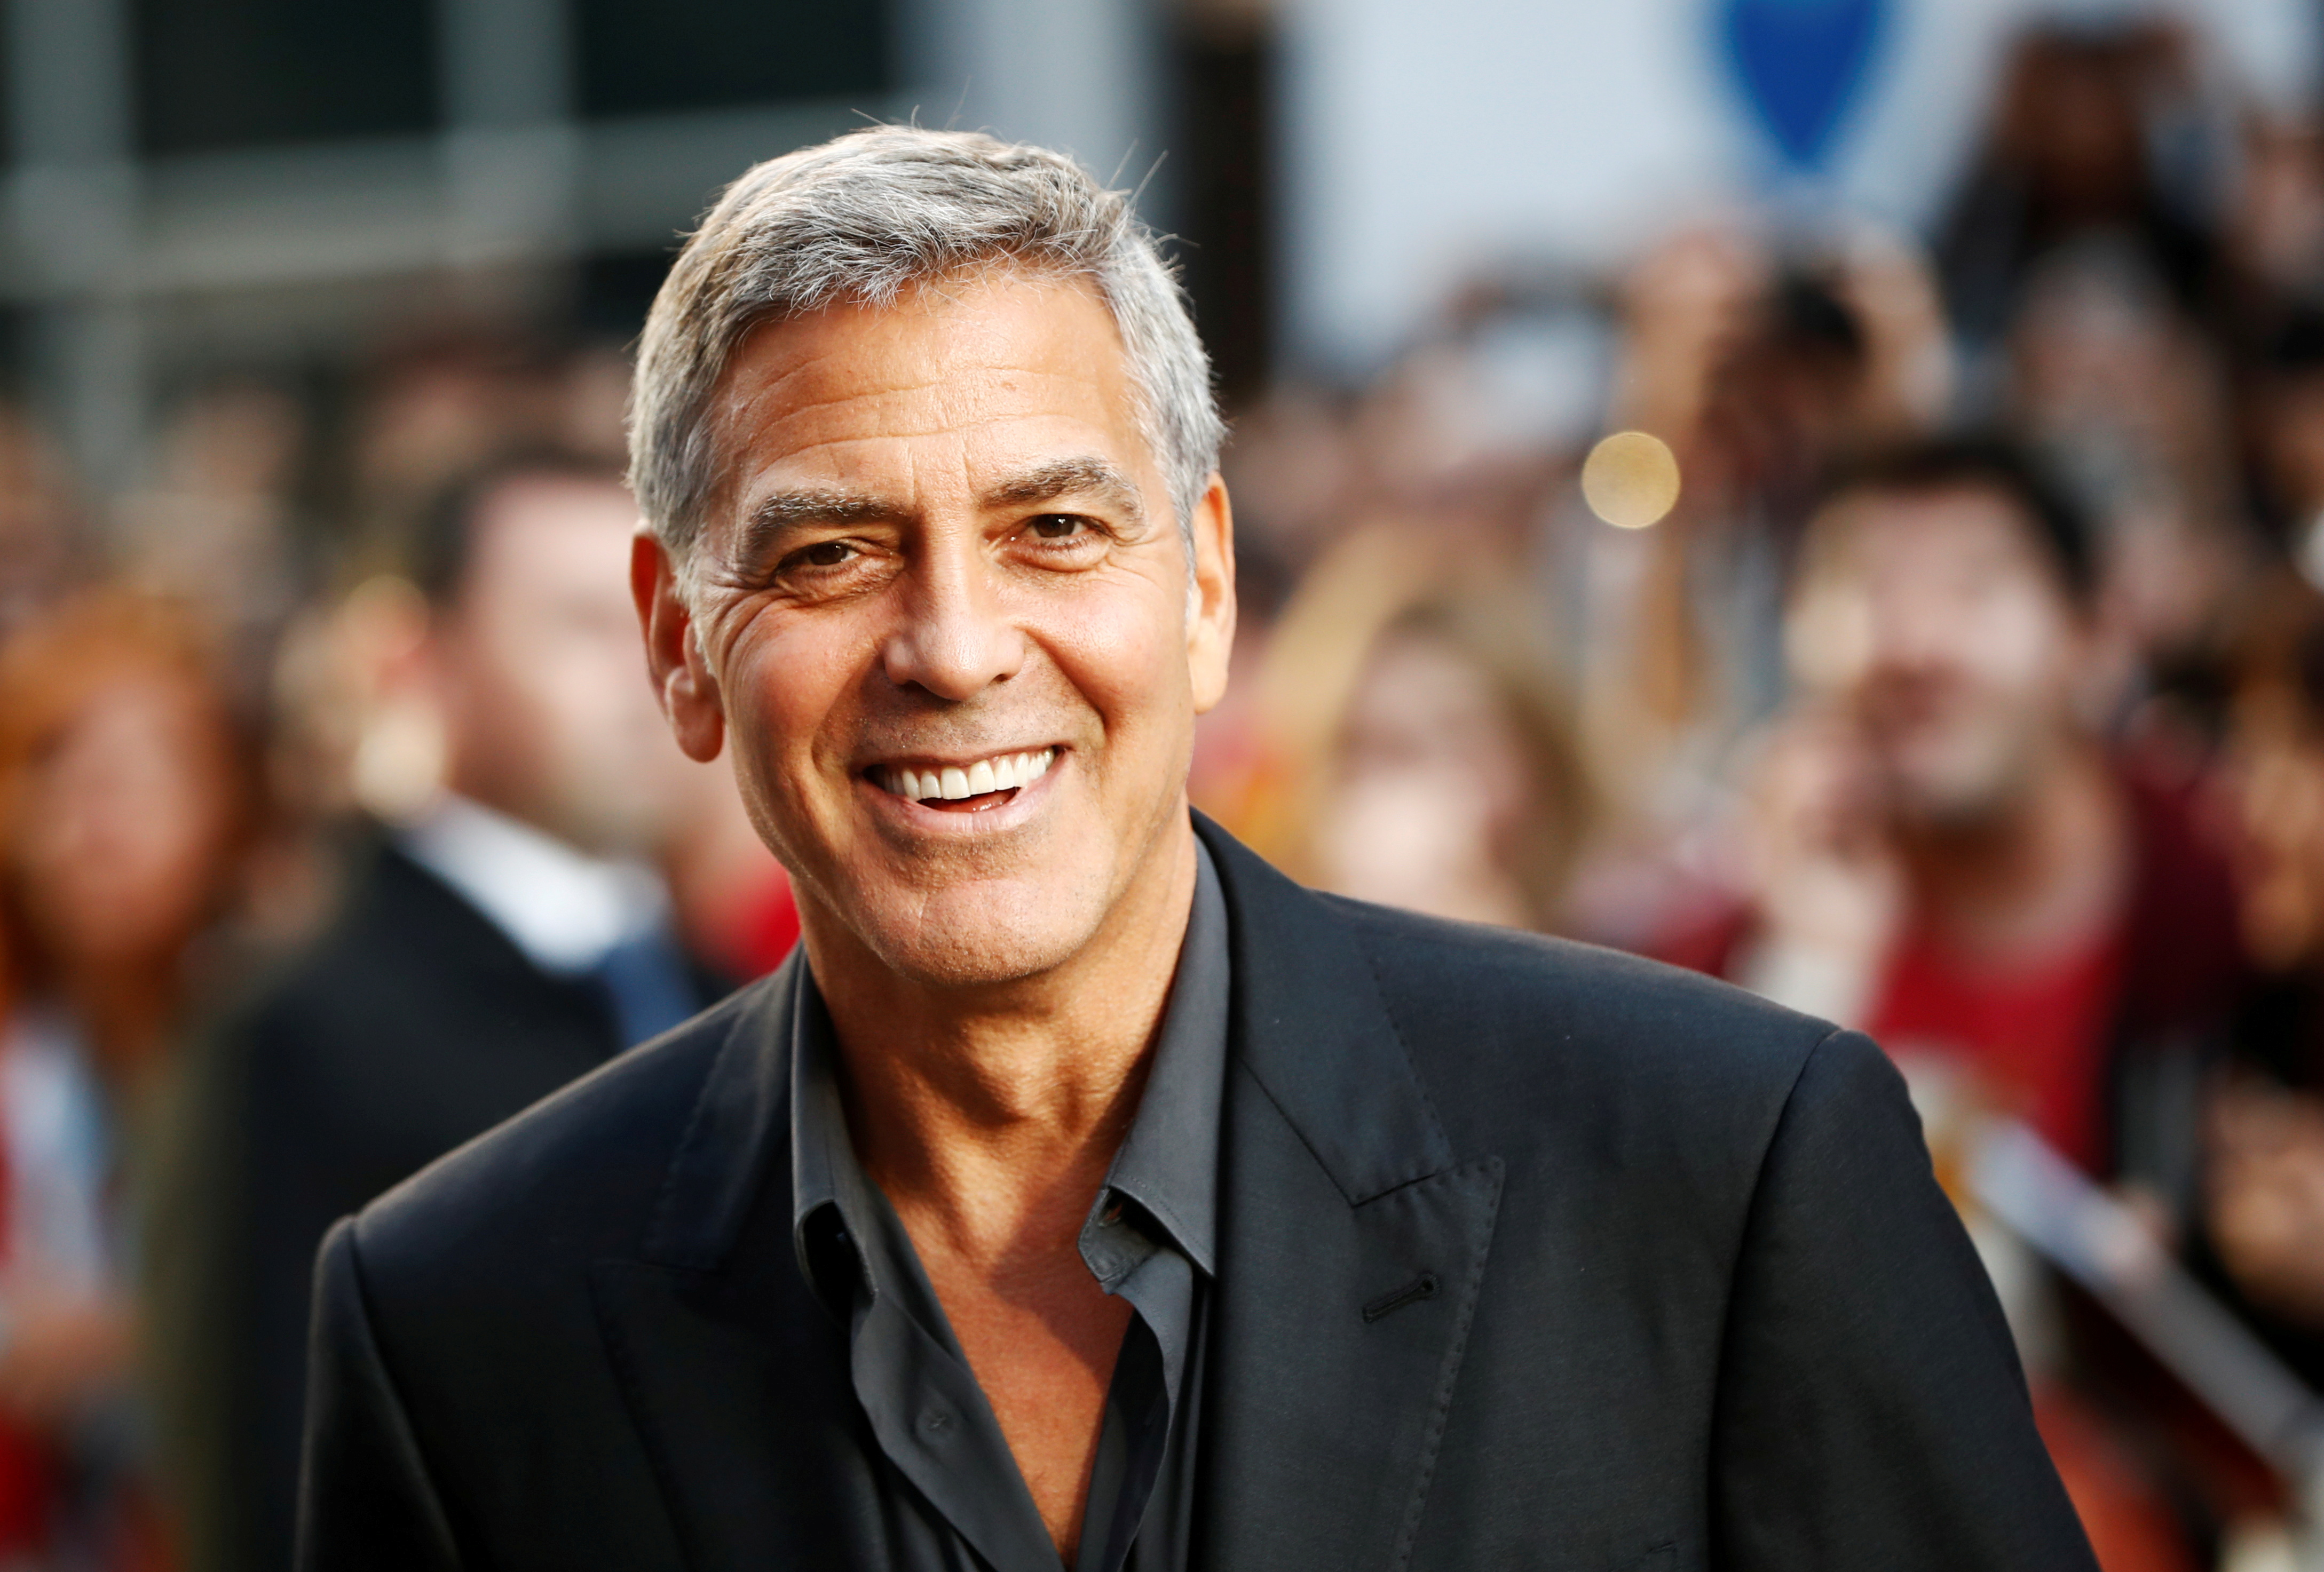 Clooney arrives on the red carpet for the film 